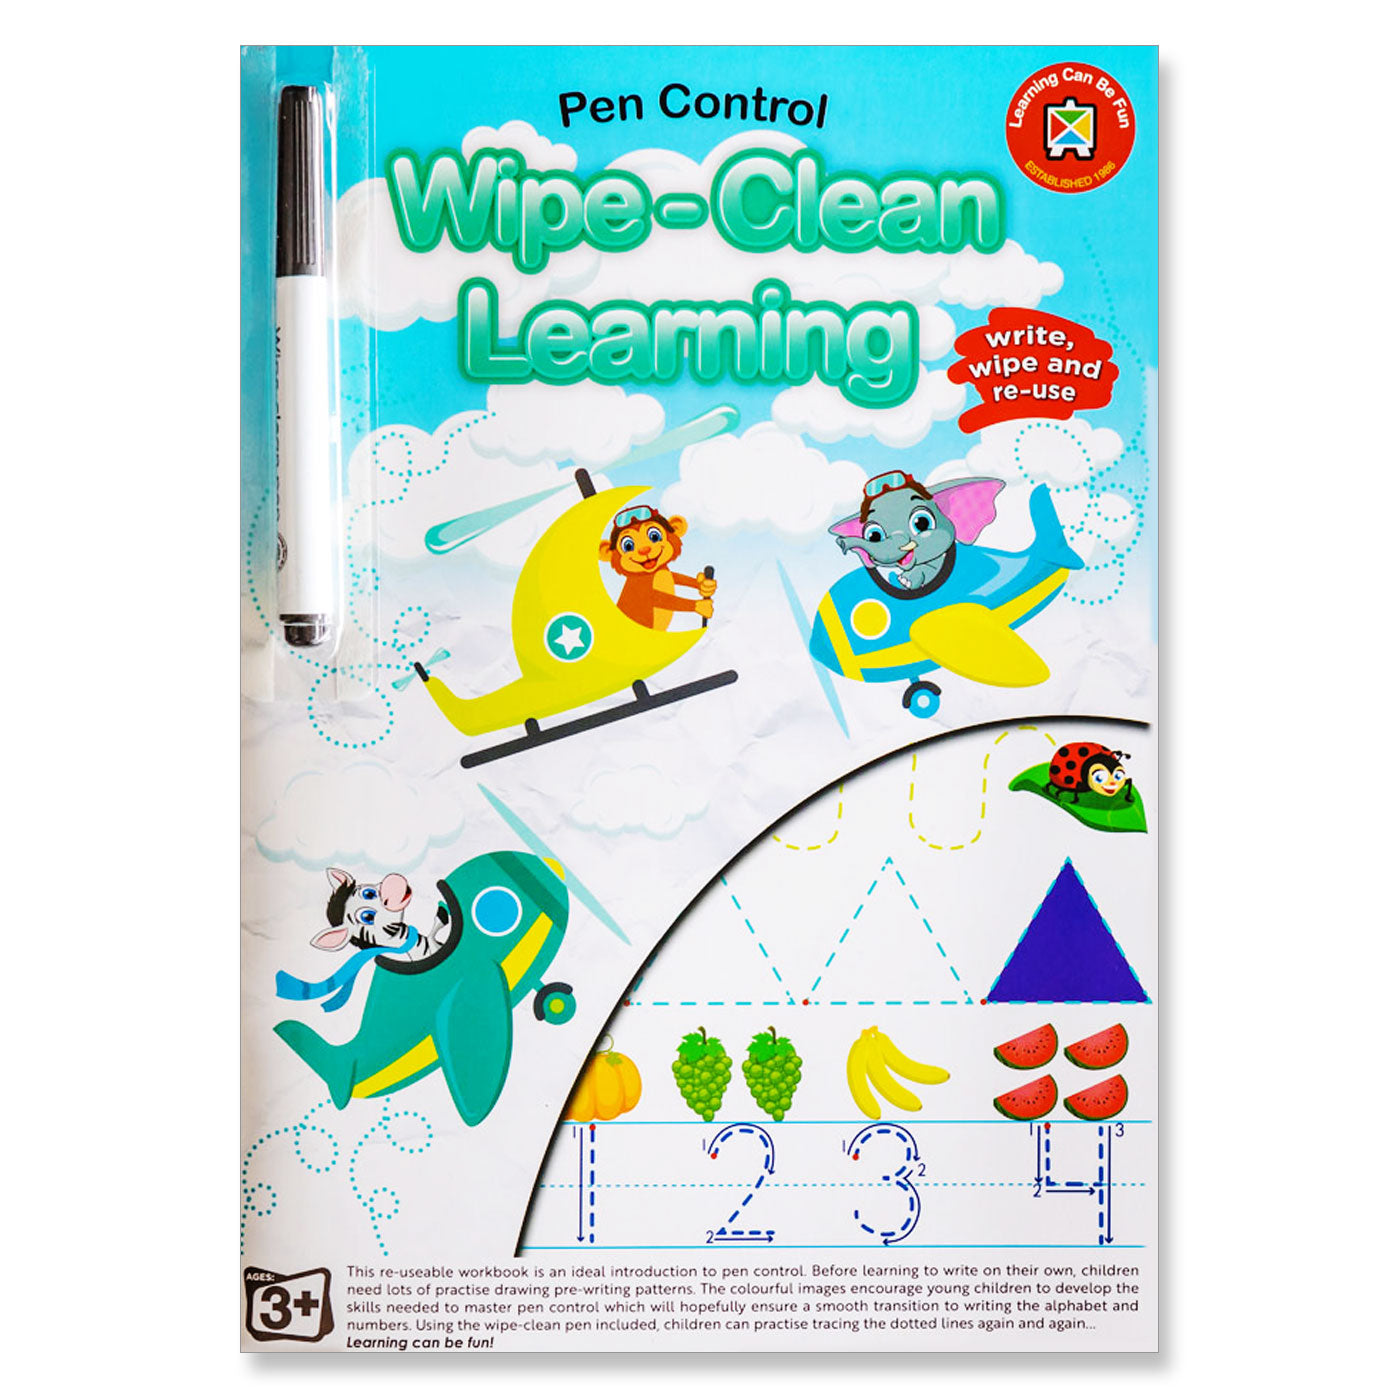 LCBF Wipe-Clean Reusable Learning Book Pen Control with Marker Ages 3+